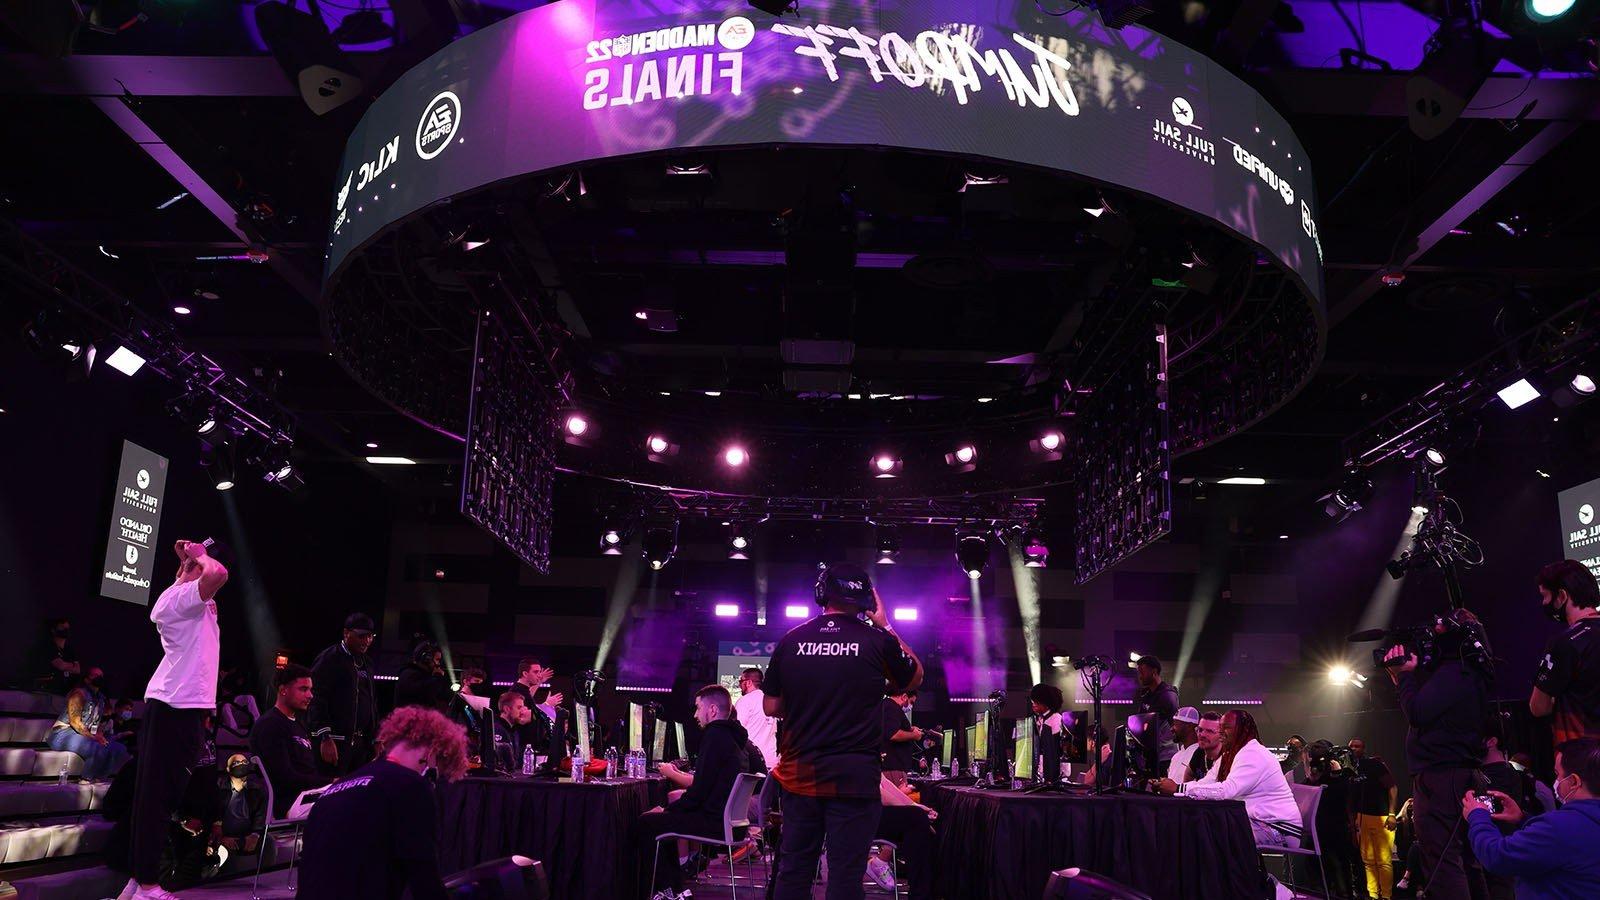 The 满帆大学 Orlando Health Fortress esports arena’s main stage and large screens feature Jump Off’s purple and white branding while competitors face-off at gaming stations.